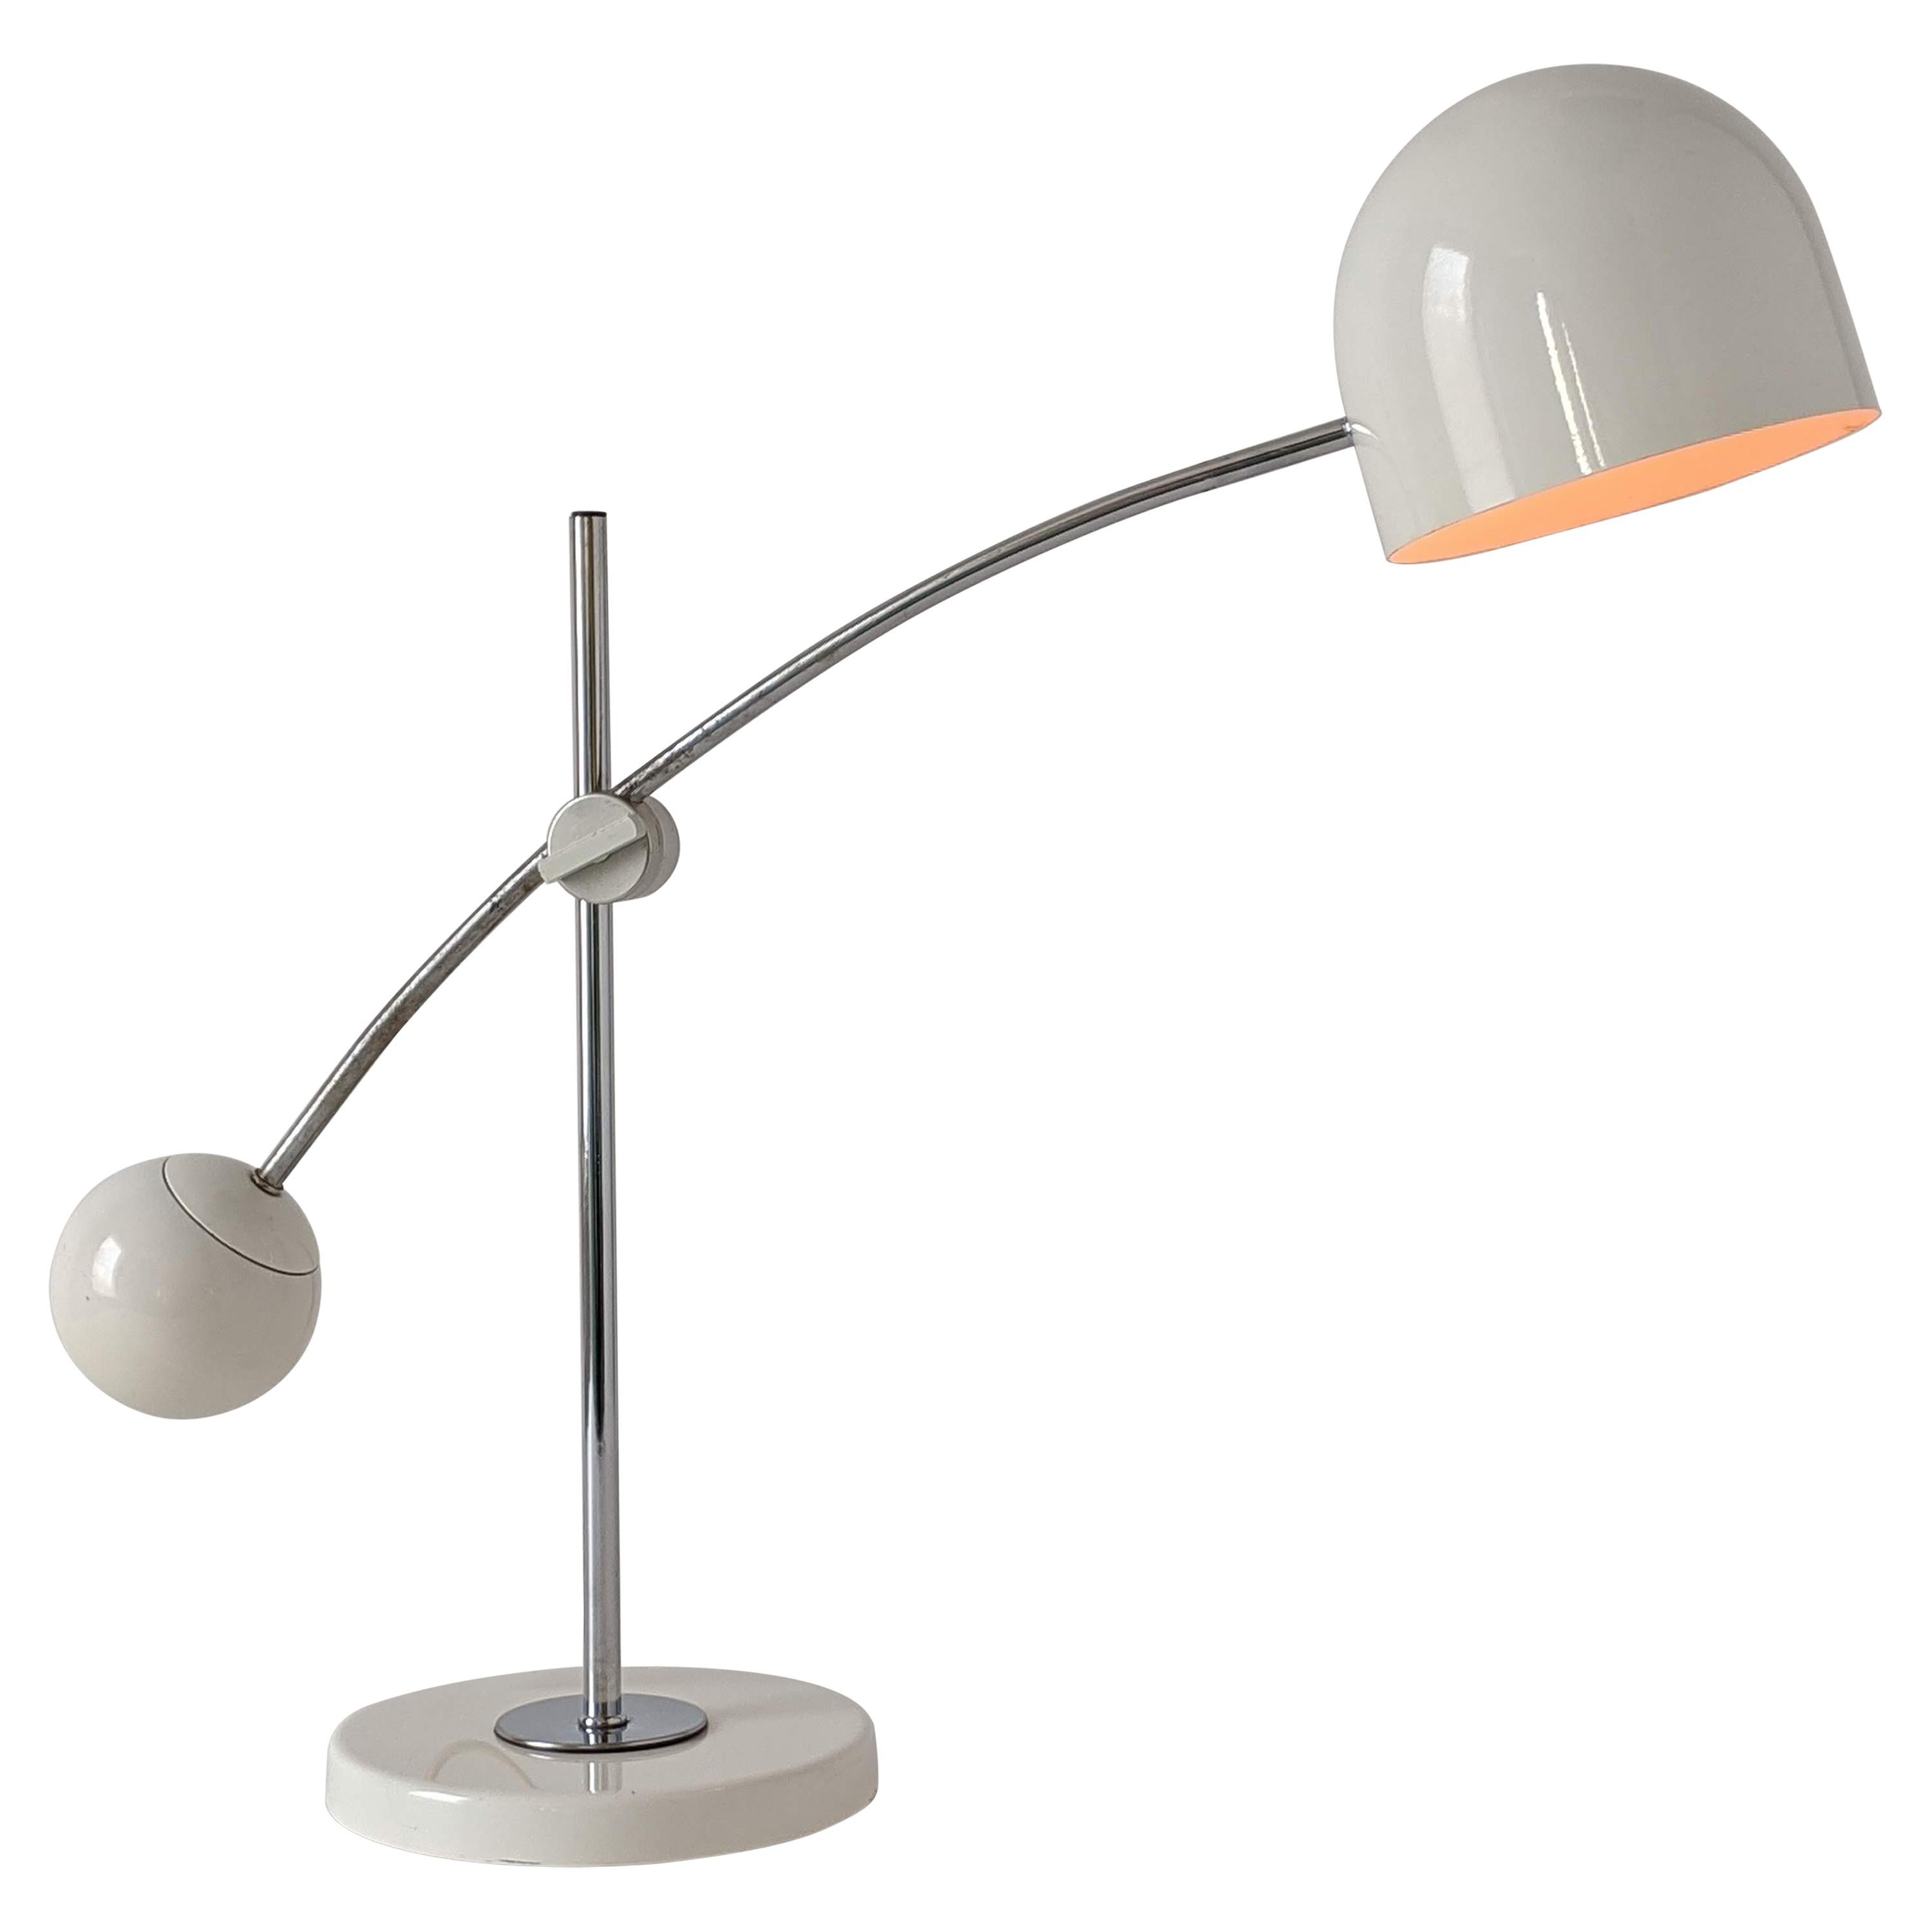 1960s Counterweight Arched Table Lamp, USA